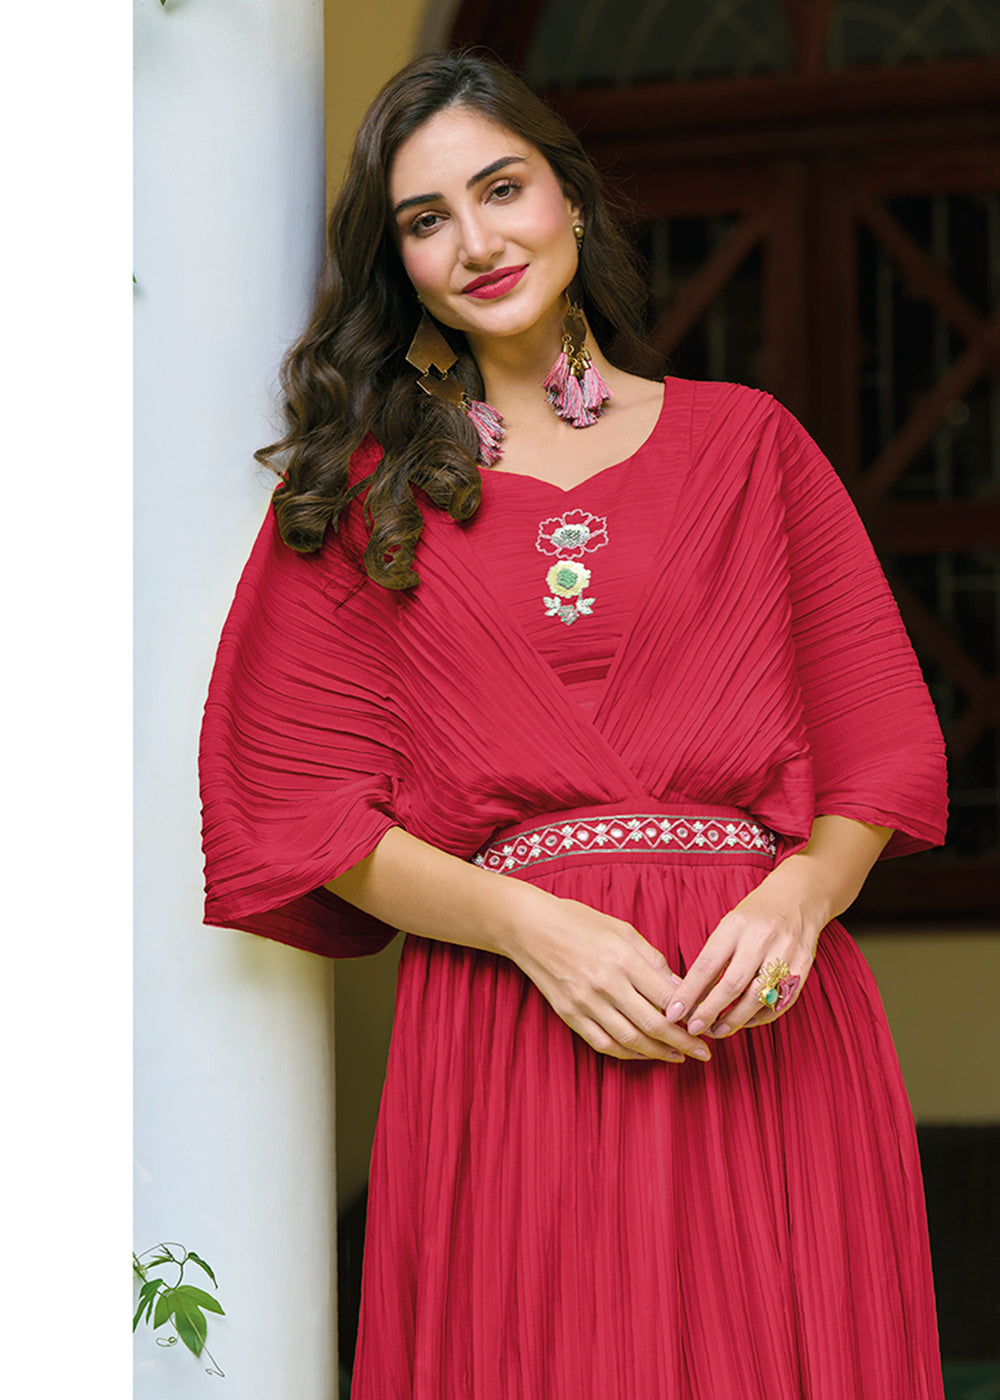 Buy Now Cherry Red Chinon Party Wear Crushed Gown Online in USA, UK, Australia, New Zealand, Canada & Worldwide at Empress Clothing.